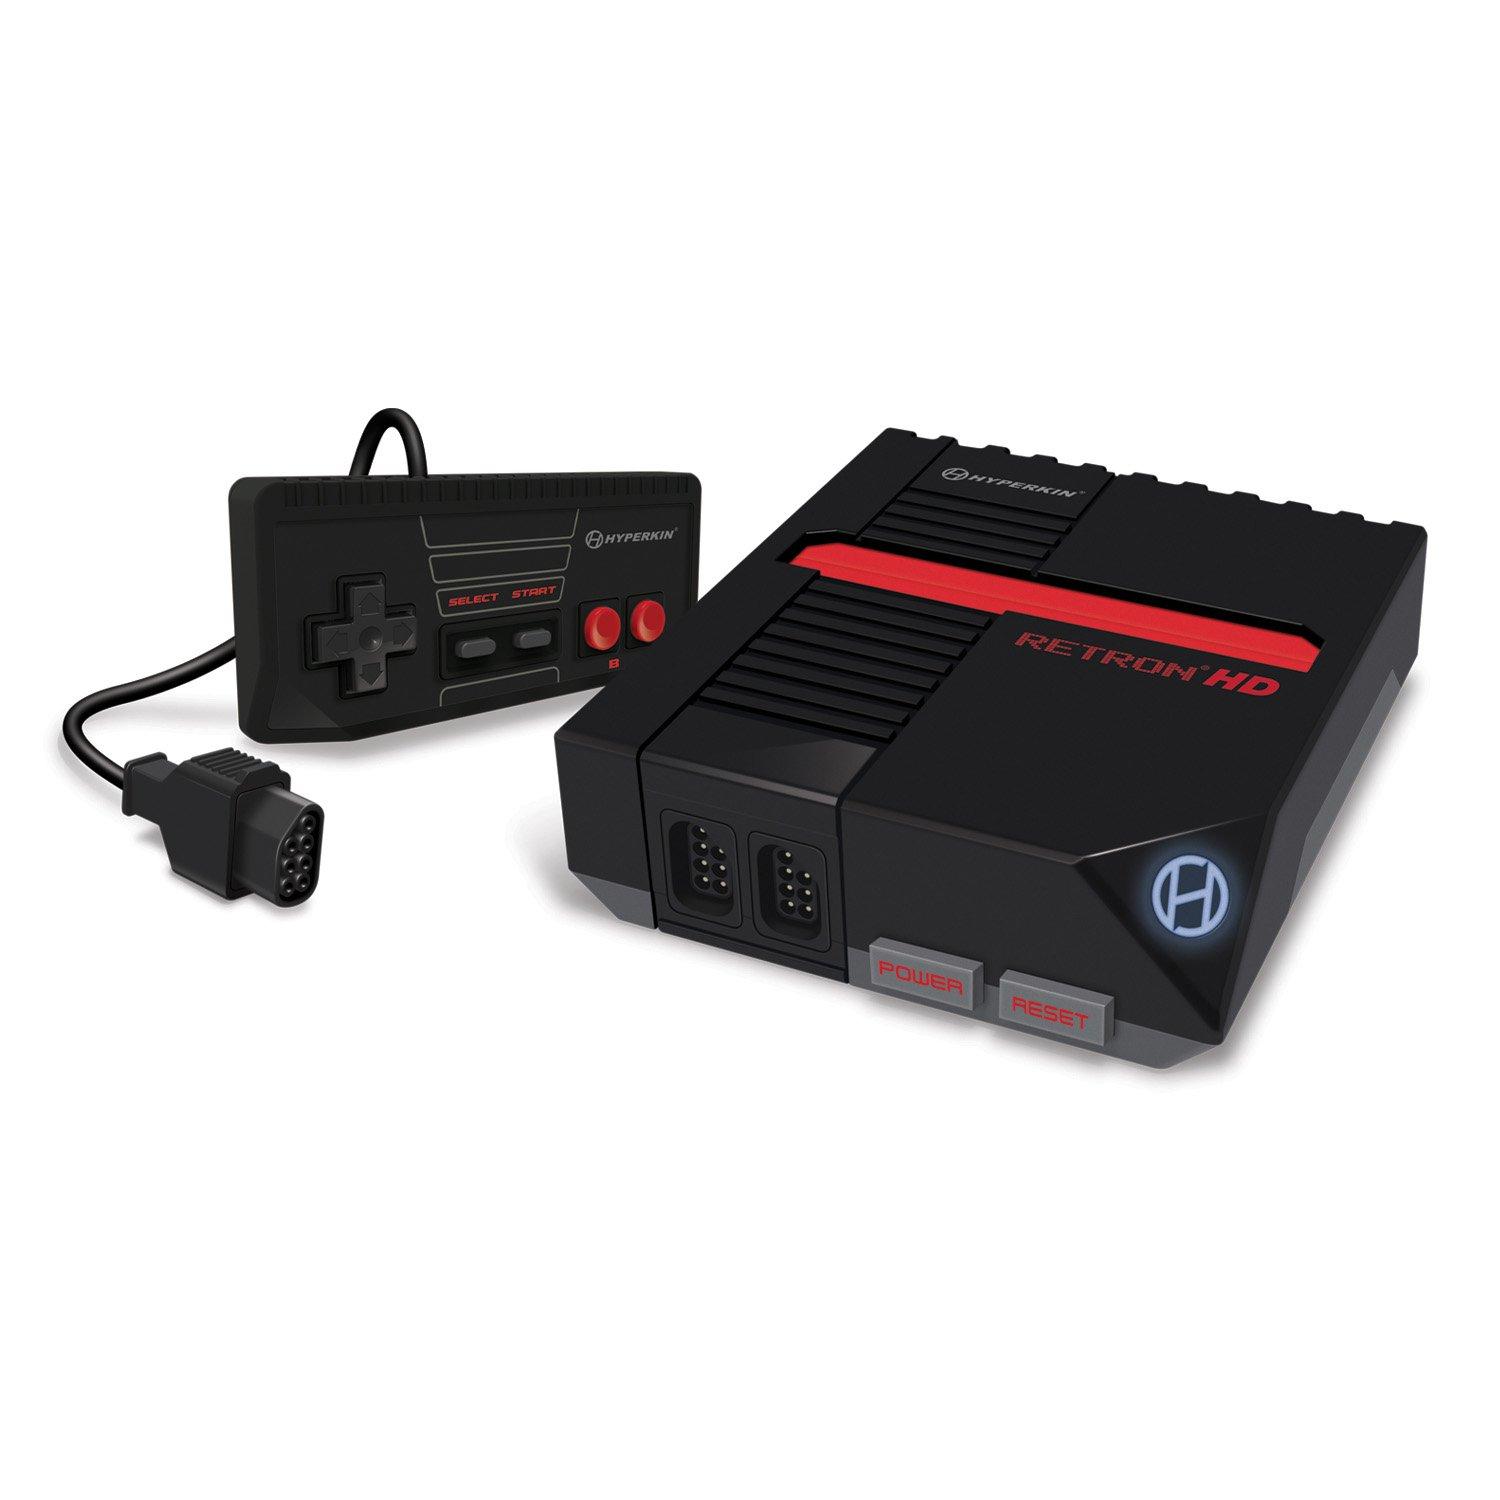 RetroN 1 HD Black Gaming Console for NES